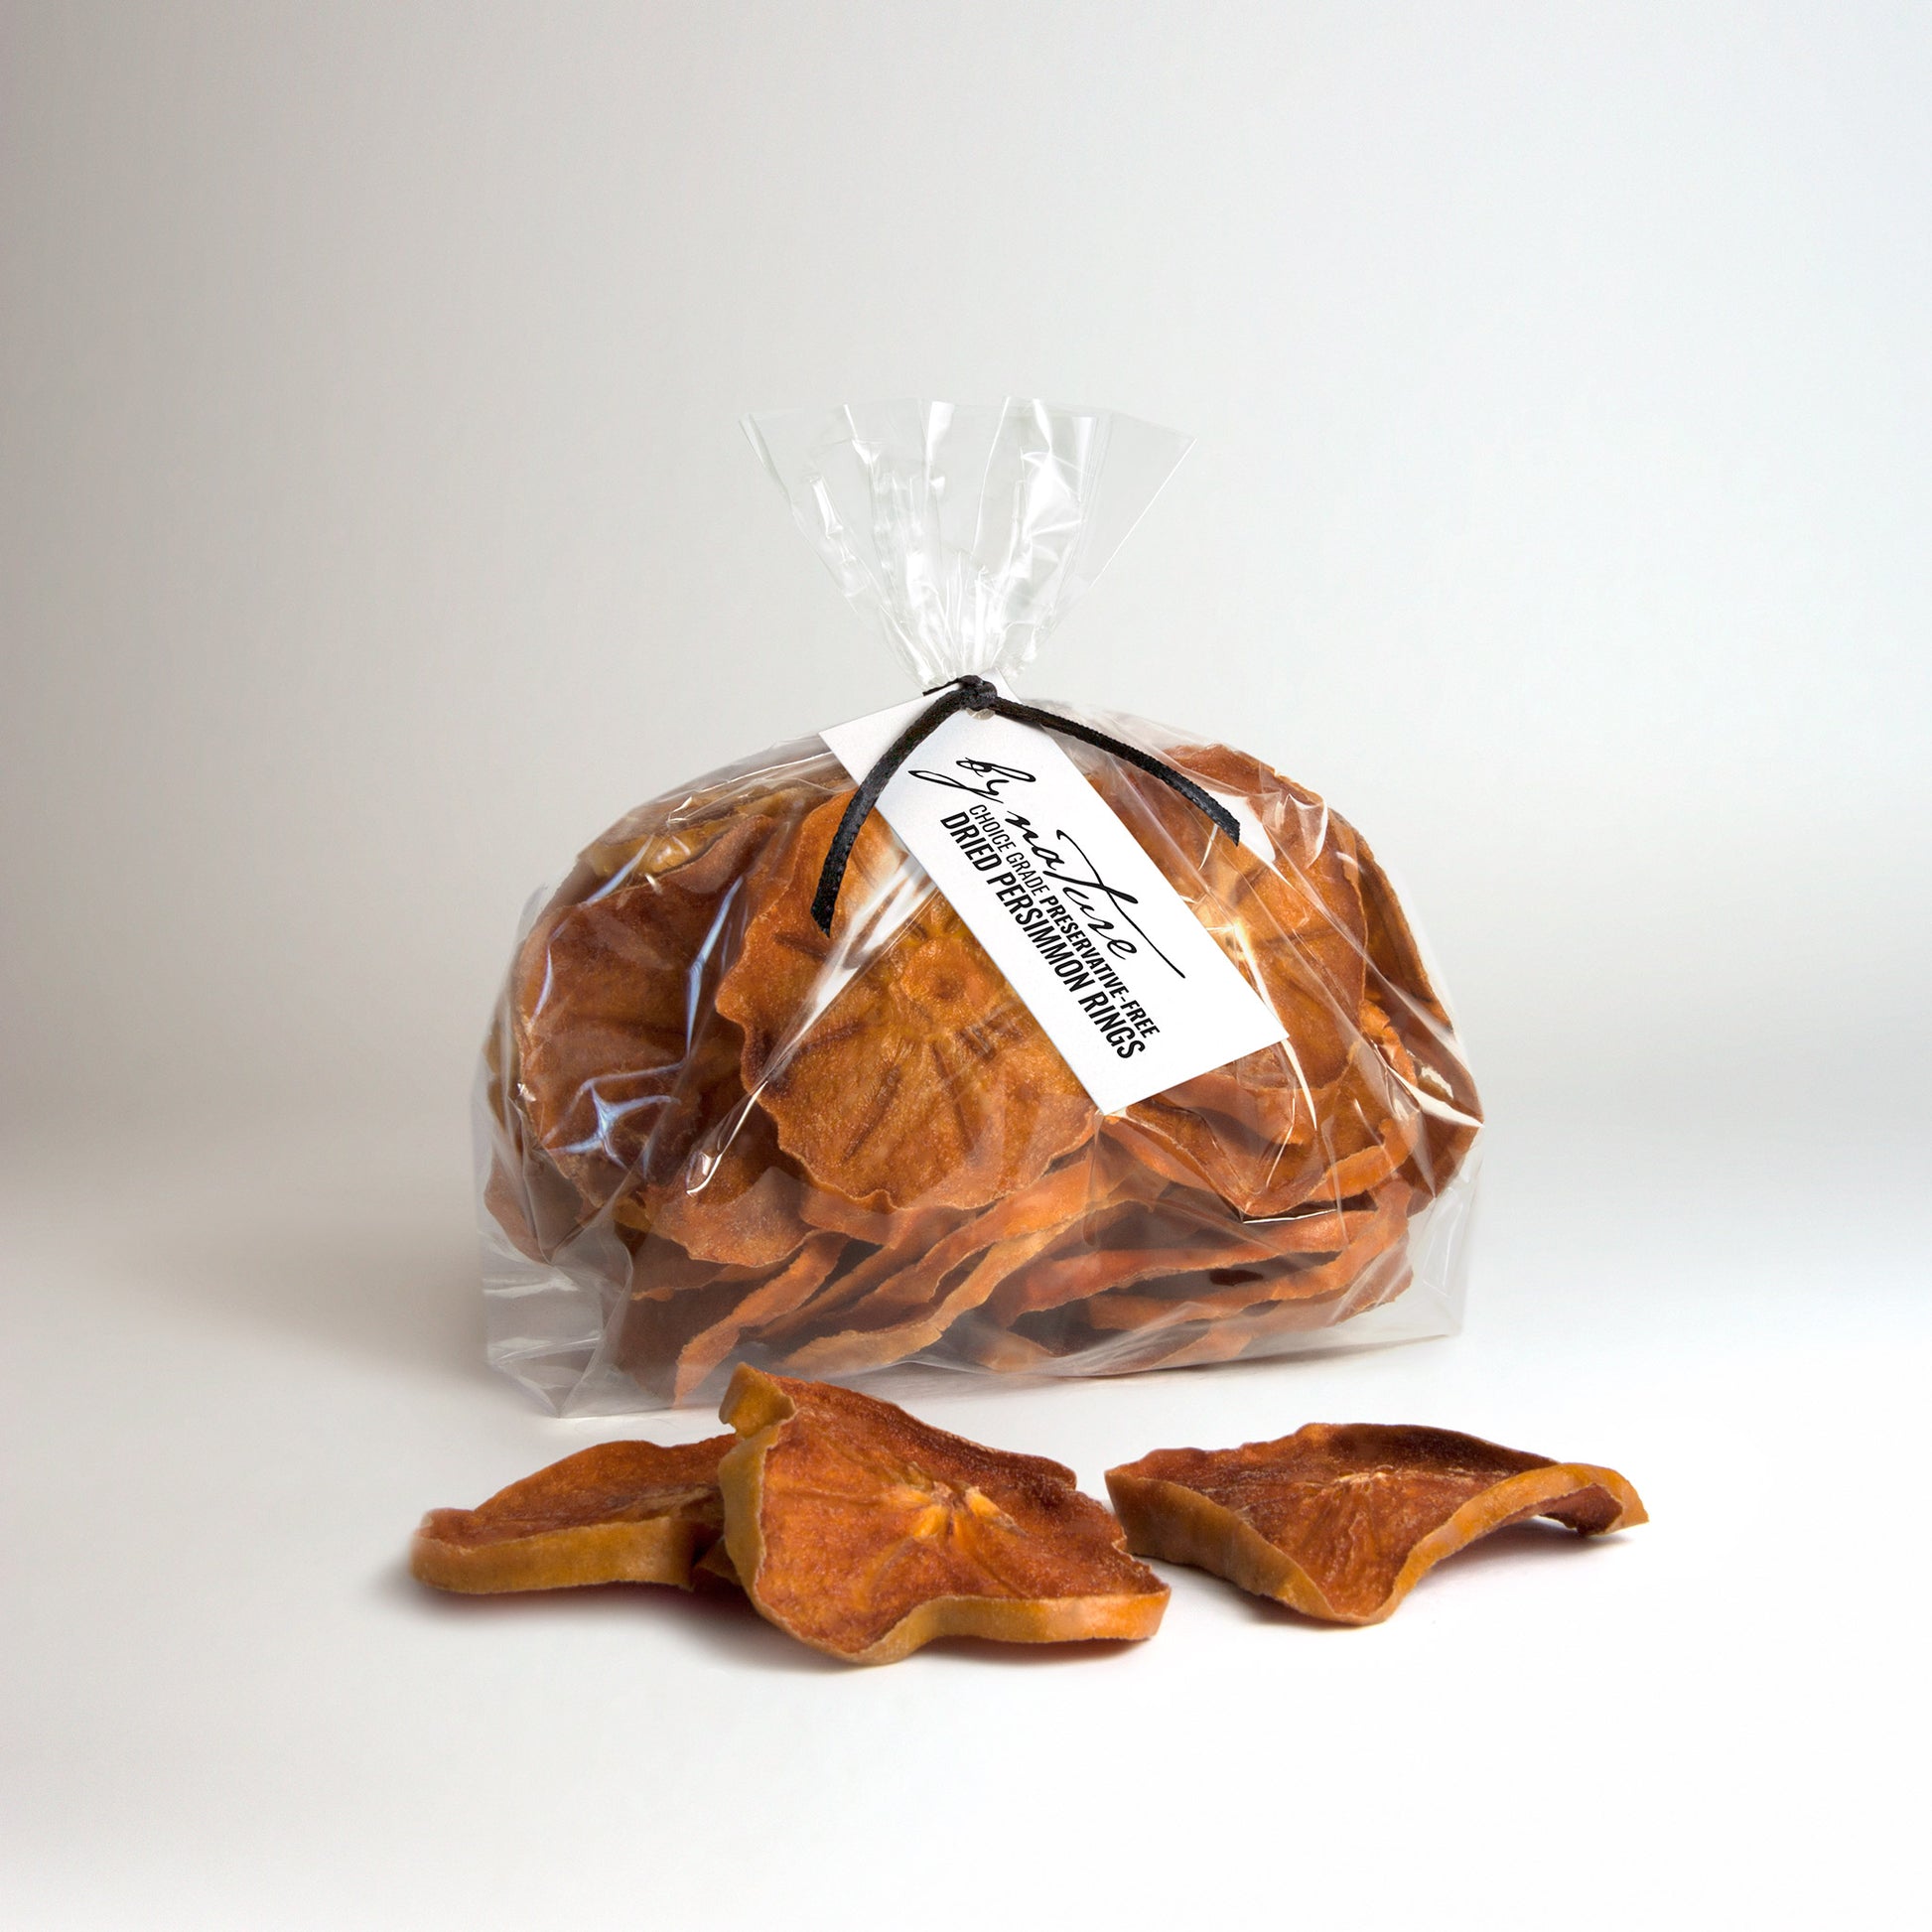 BY NATURE Dried Persimmon Rings, 250g - preservative-free.